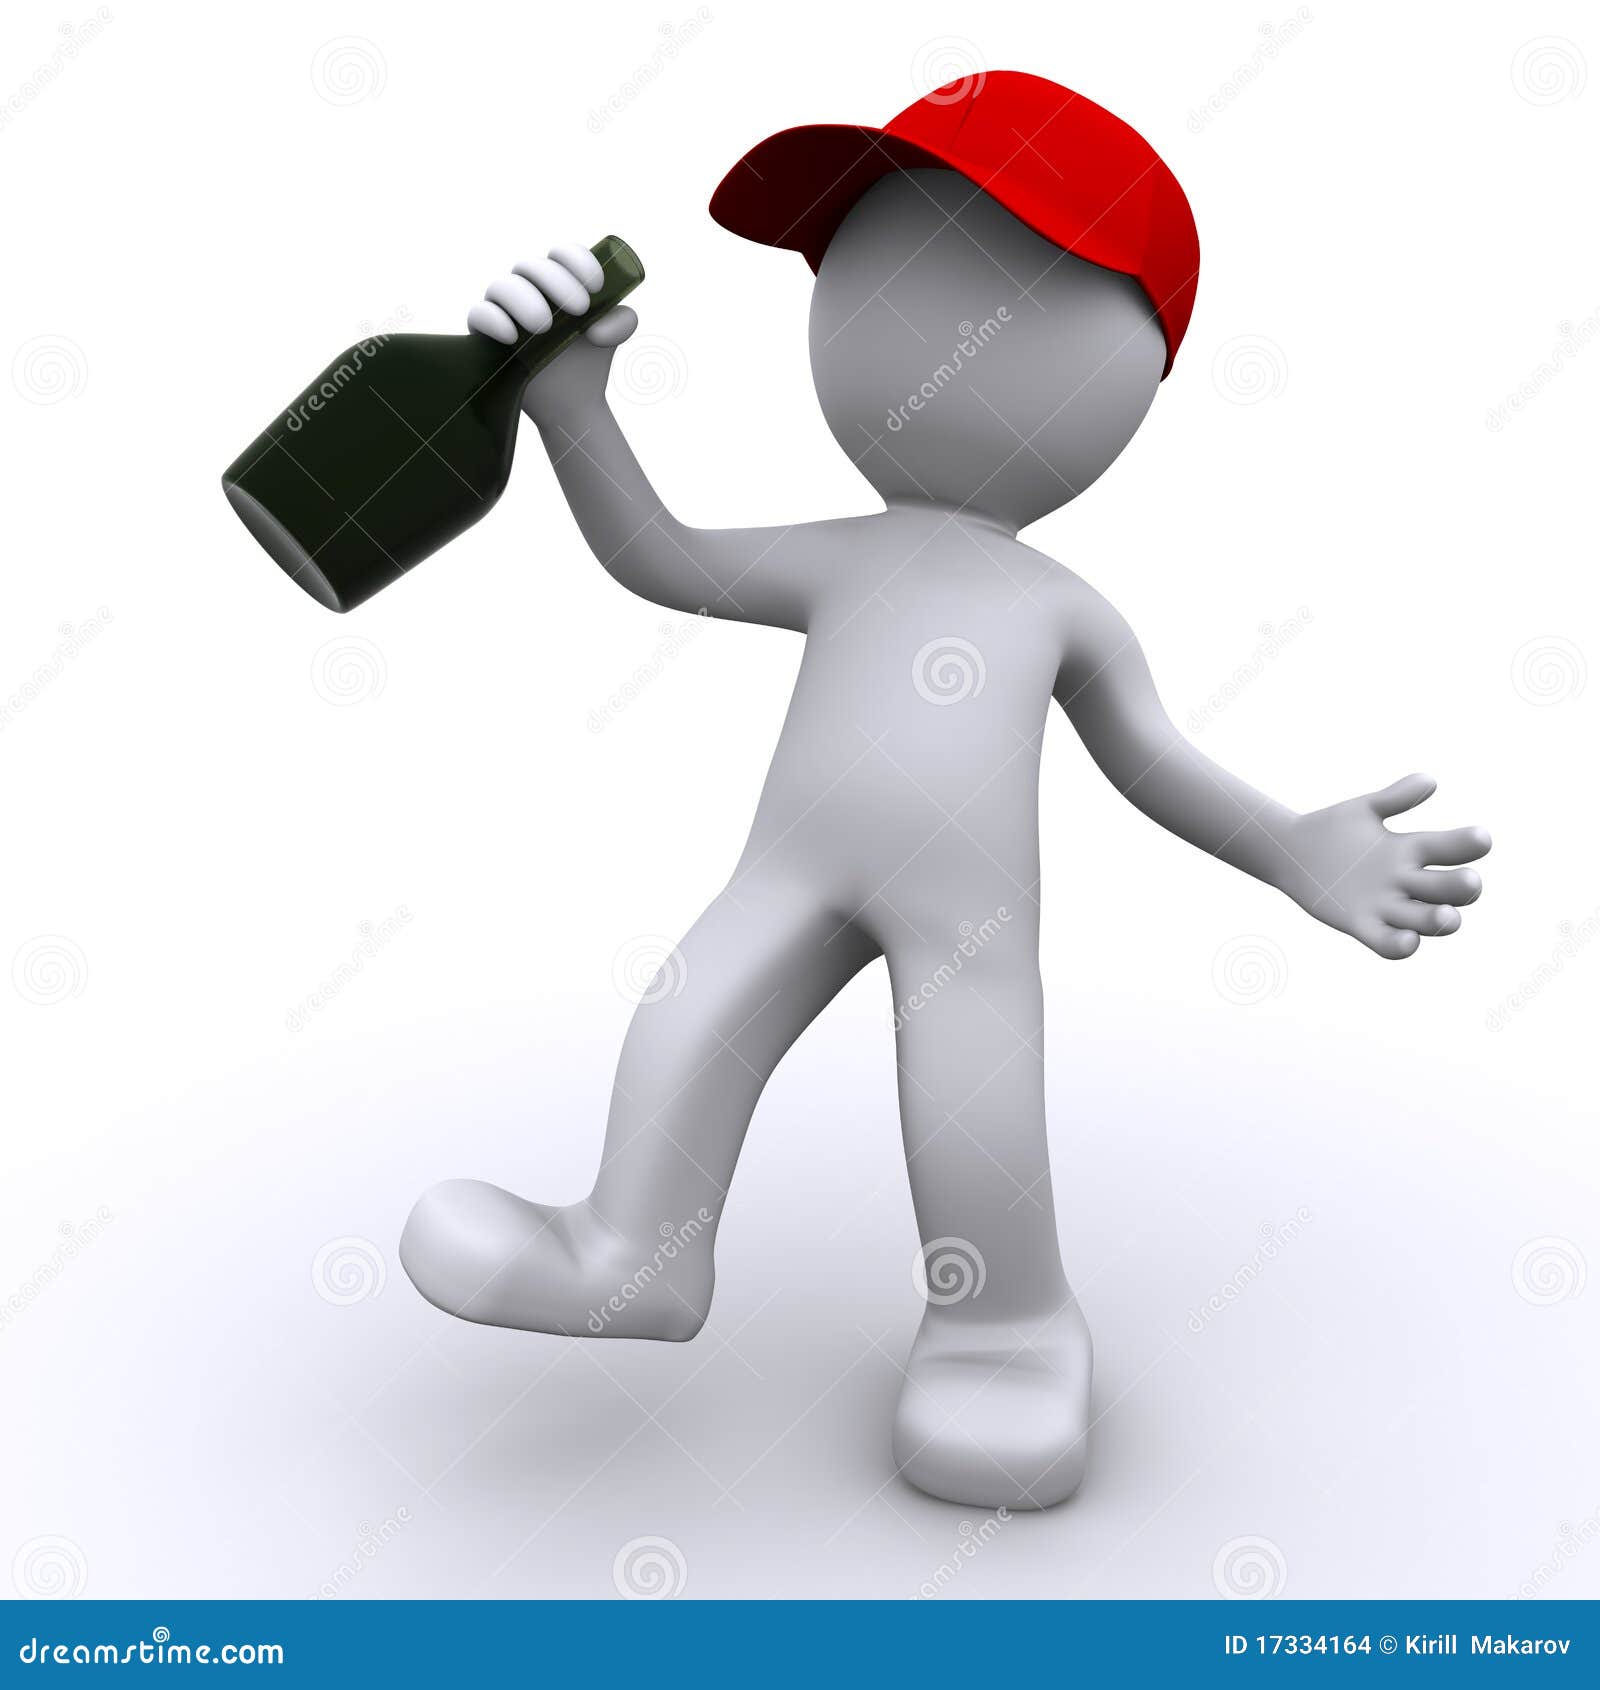 Drunk 3d Character With Green Bottle Stock Images - Image: 17334164